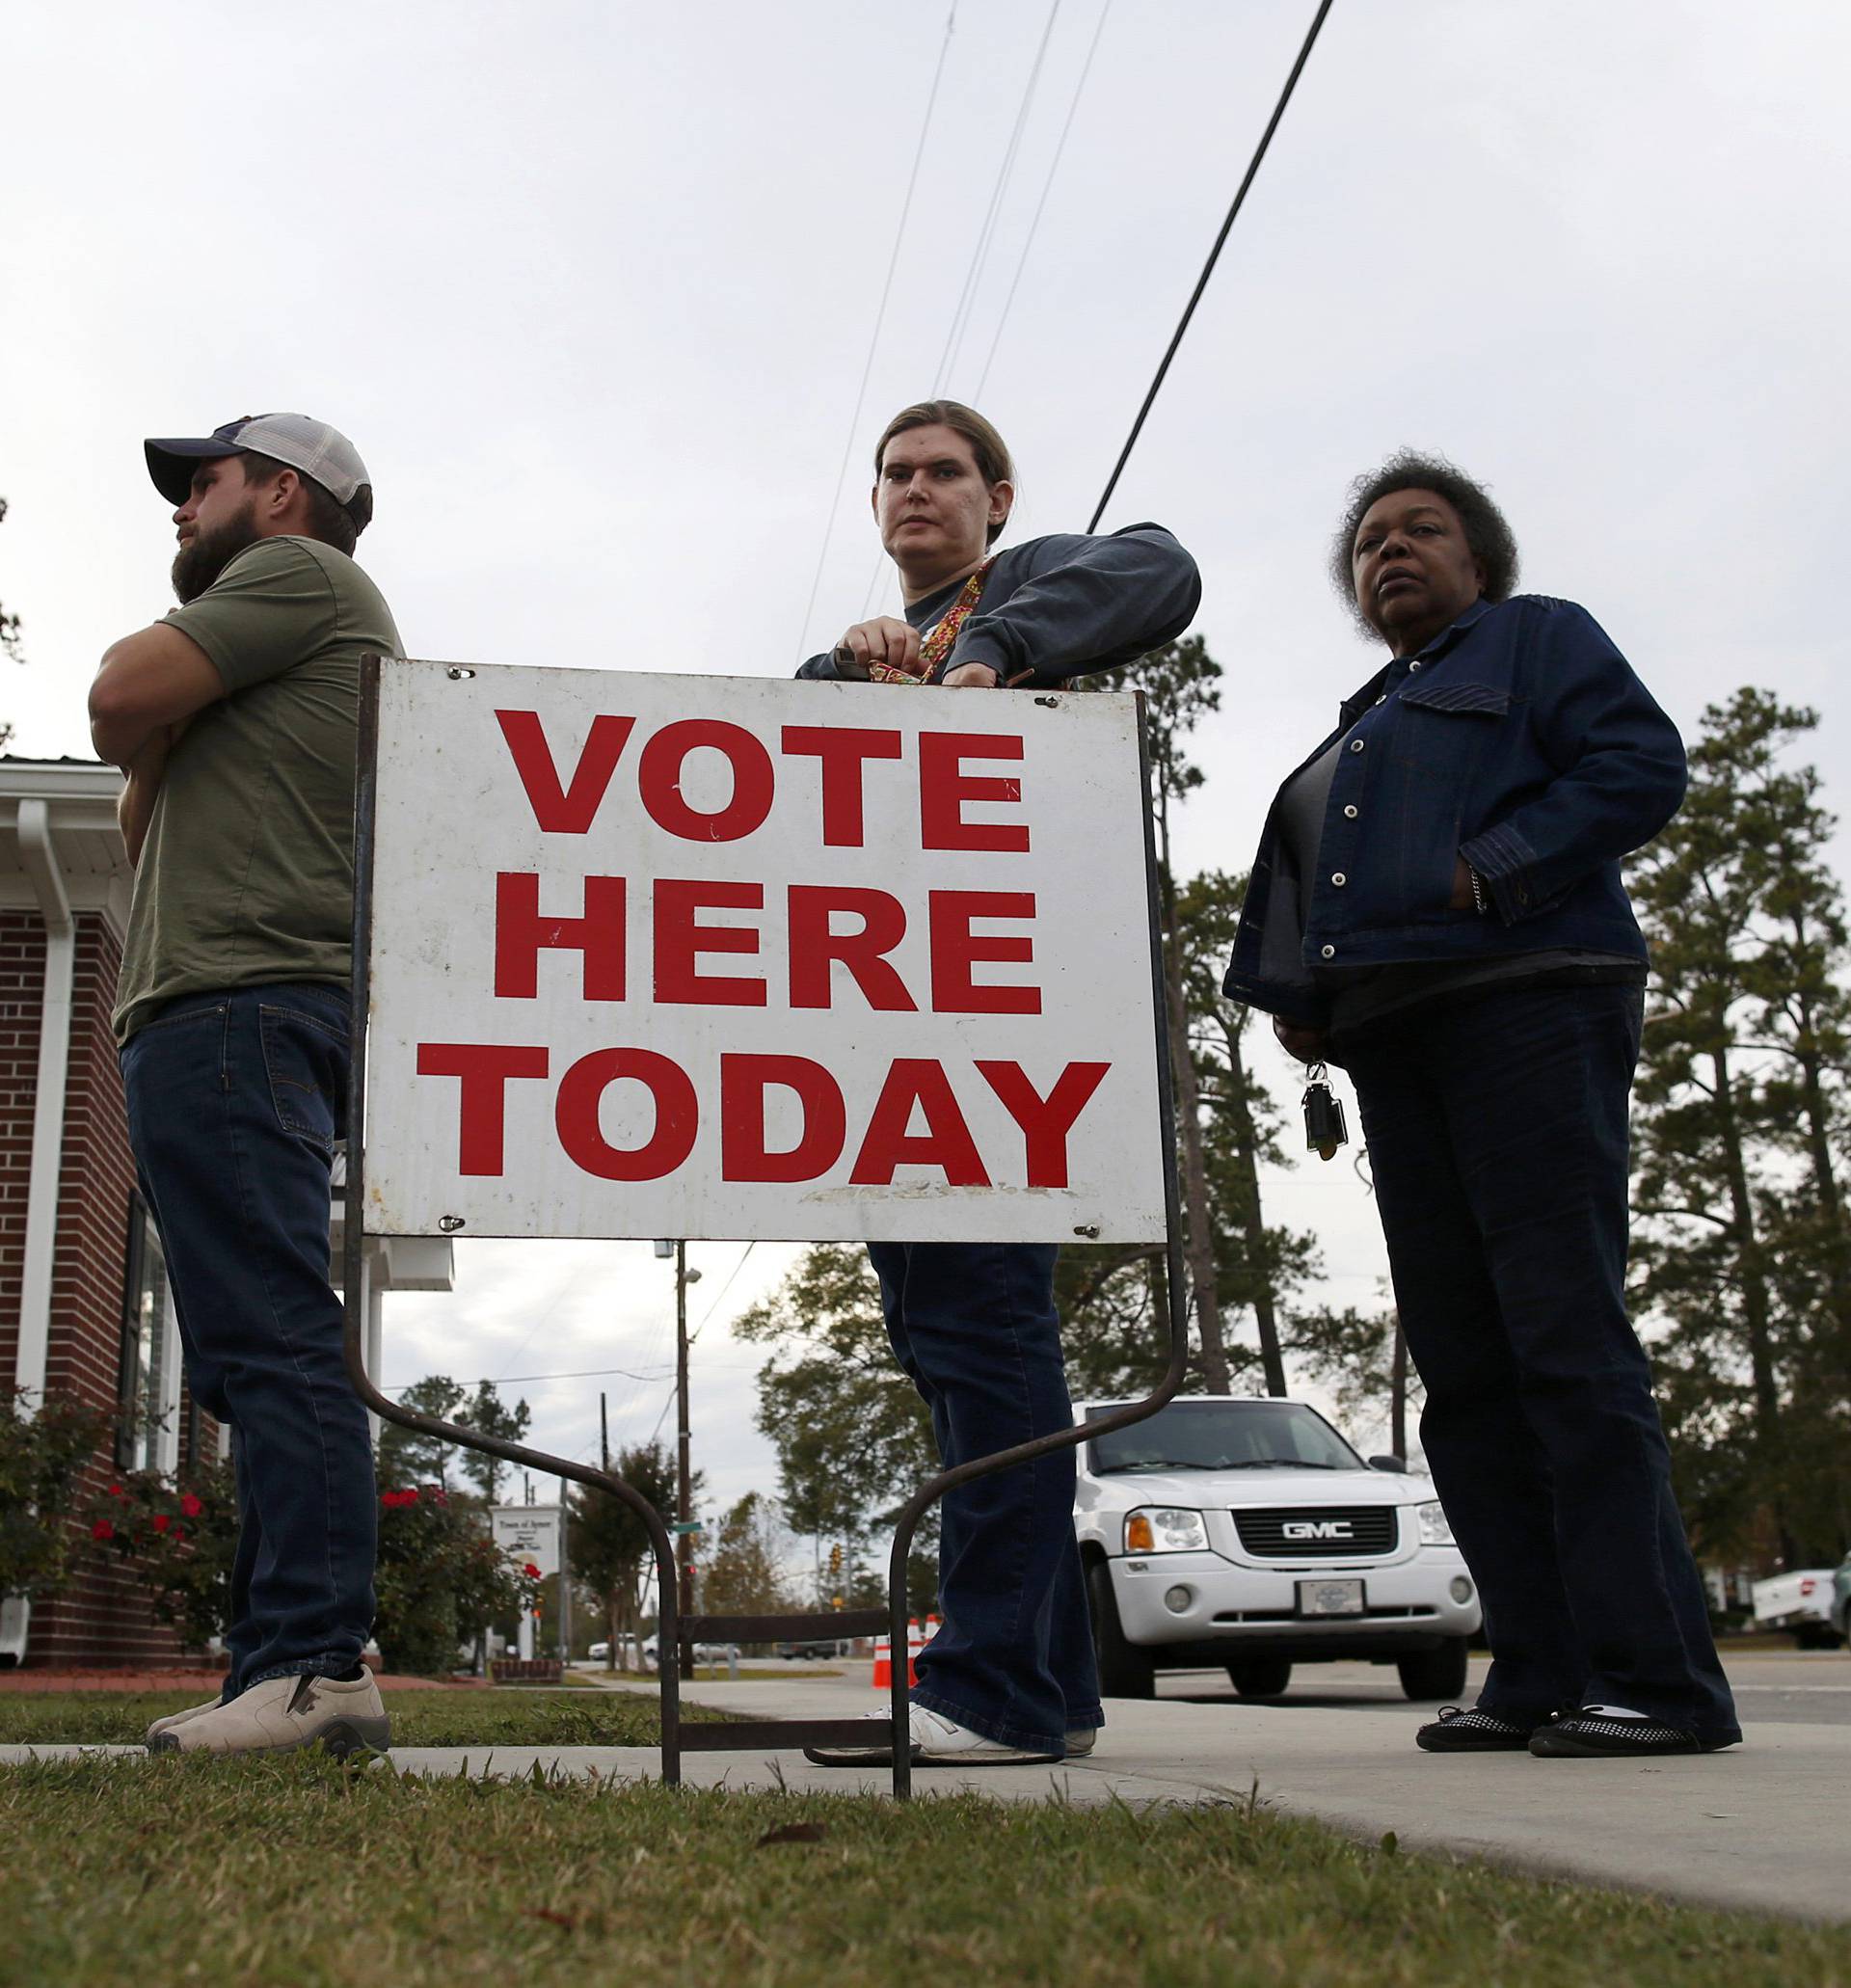 People wait in line to cast their ballots at the Aynor Town Hall during the U.S. presidential election in Aynor